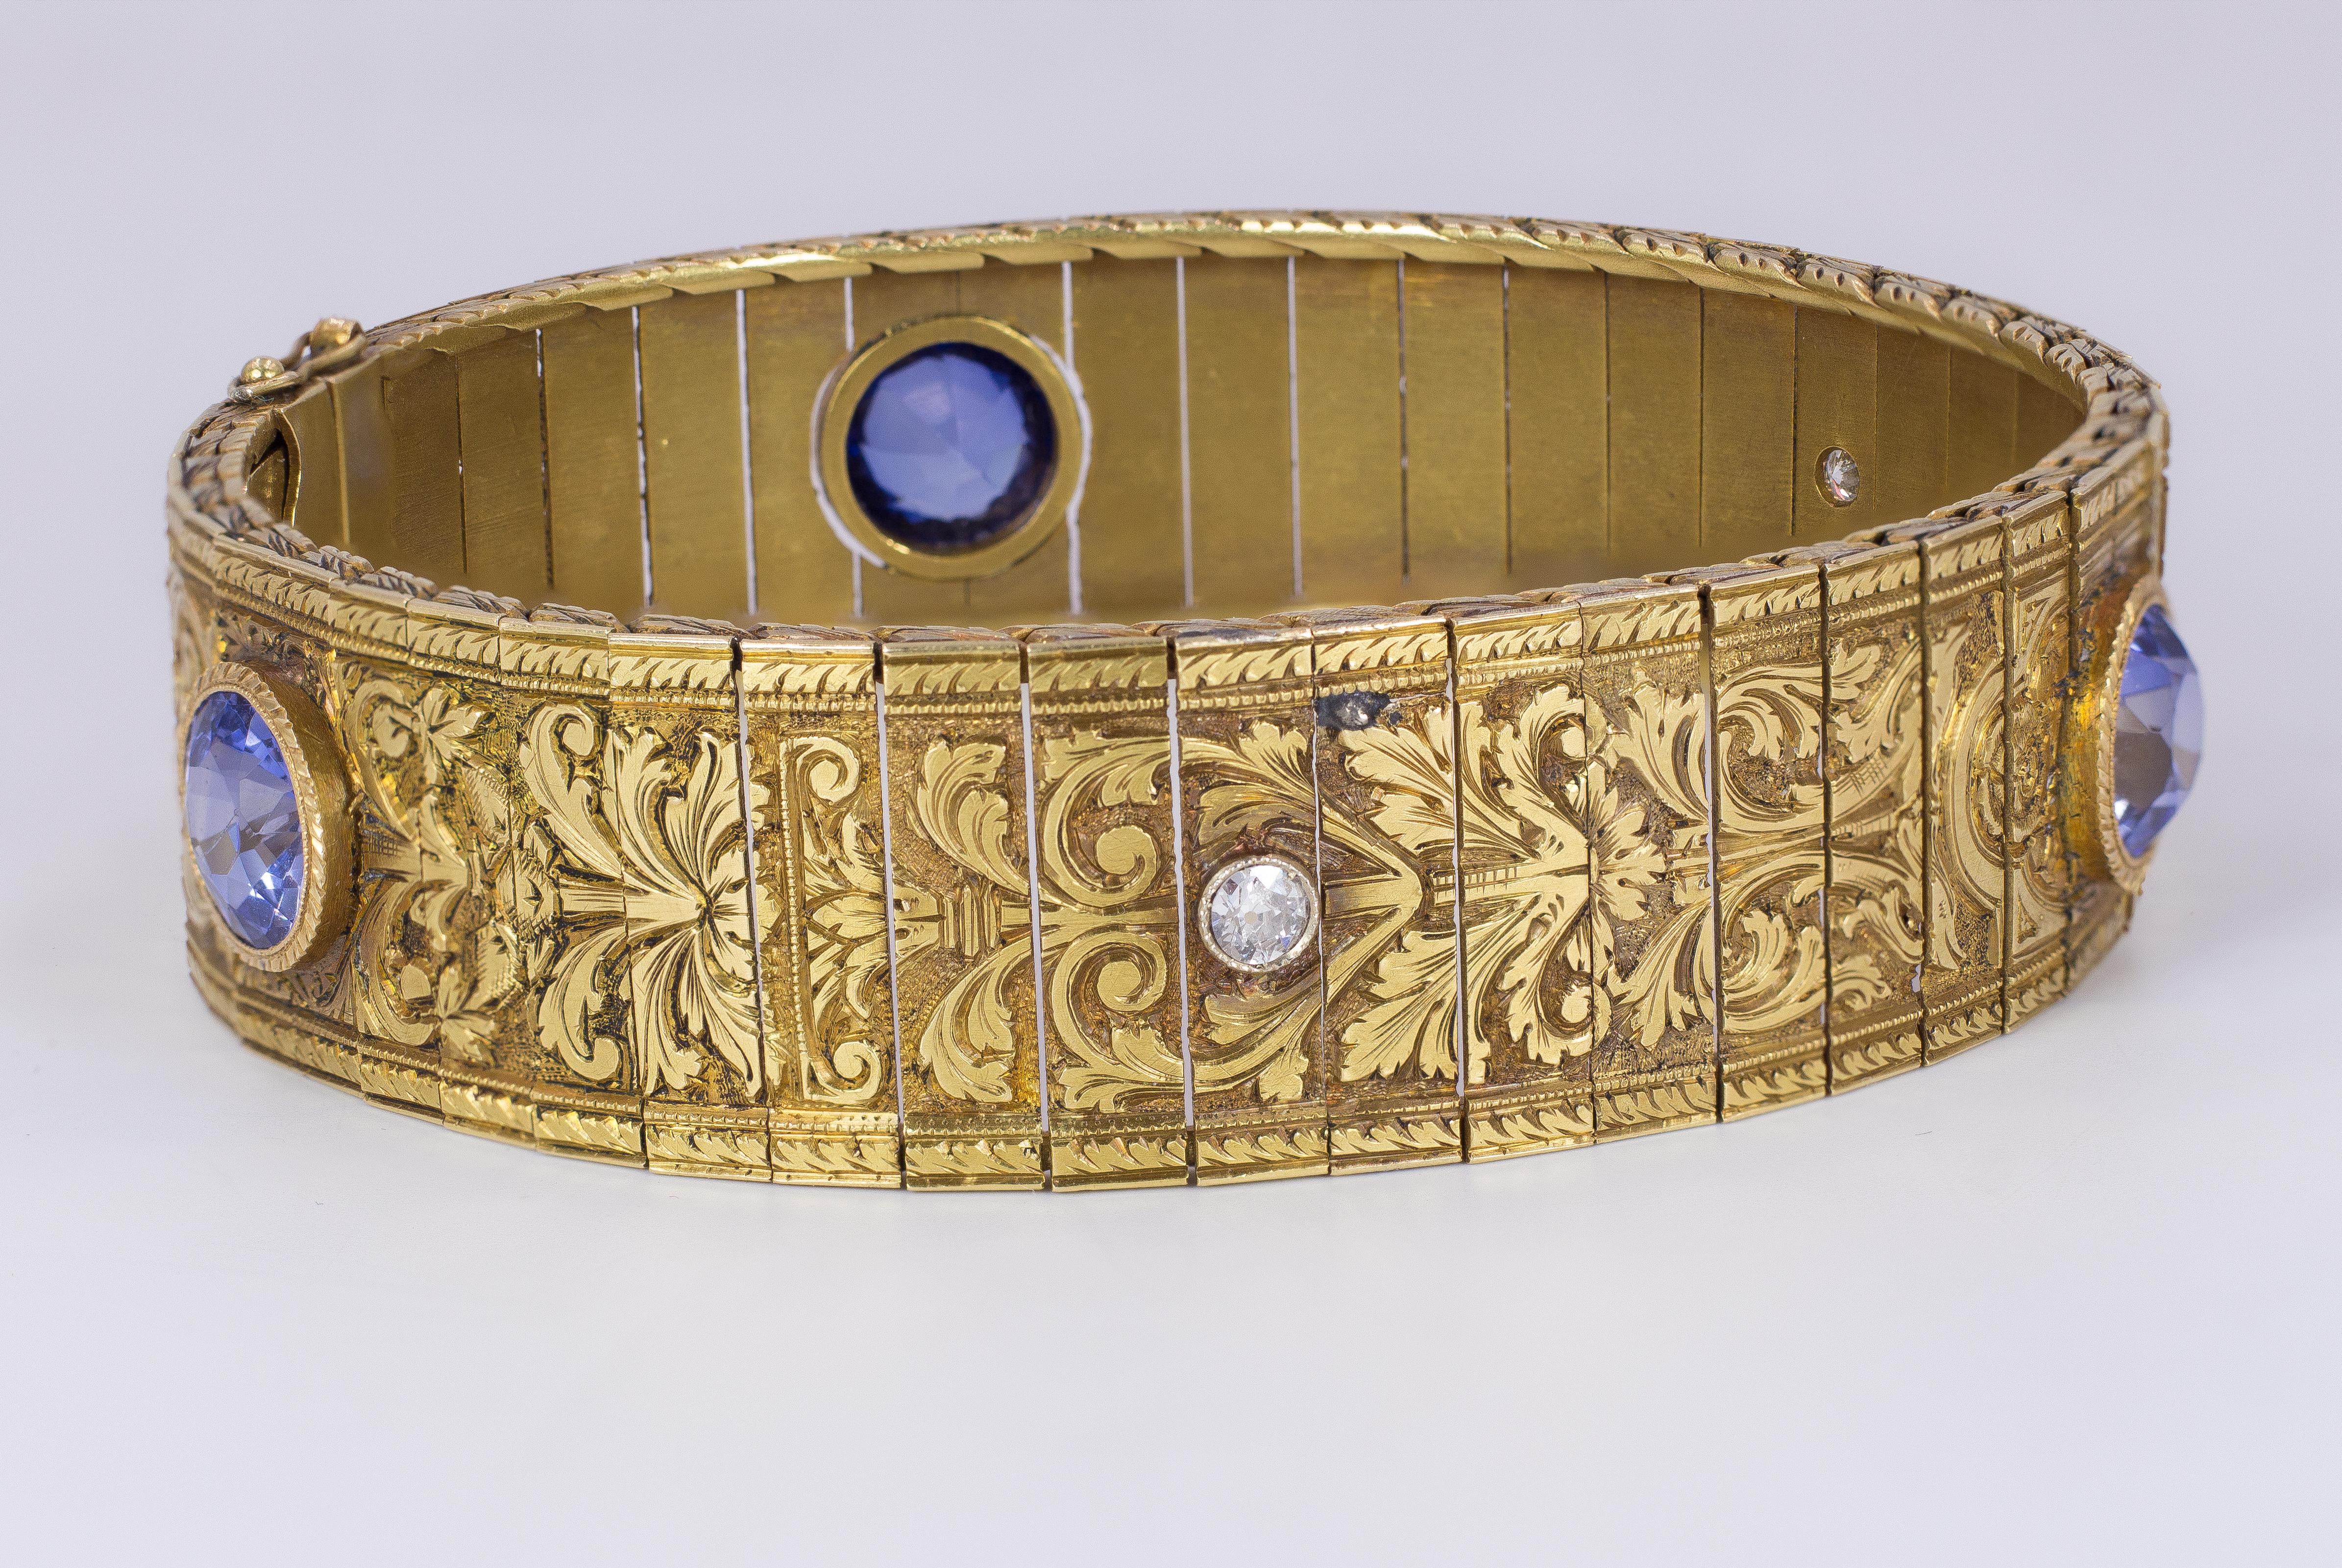 A stunning and incredible antique cuff bangle, dating from the early 20th Century, completely hand carved and modelled in 18K gold throughout.
It features some outstanding carvings, that give birth to beautiful floral and geometrical drawings; it is